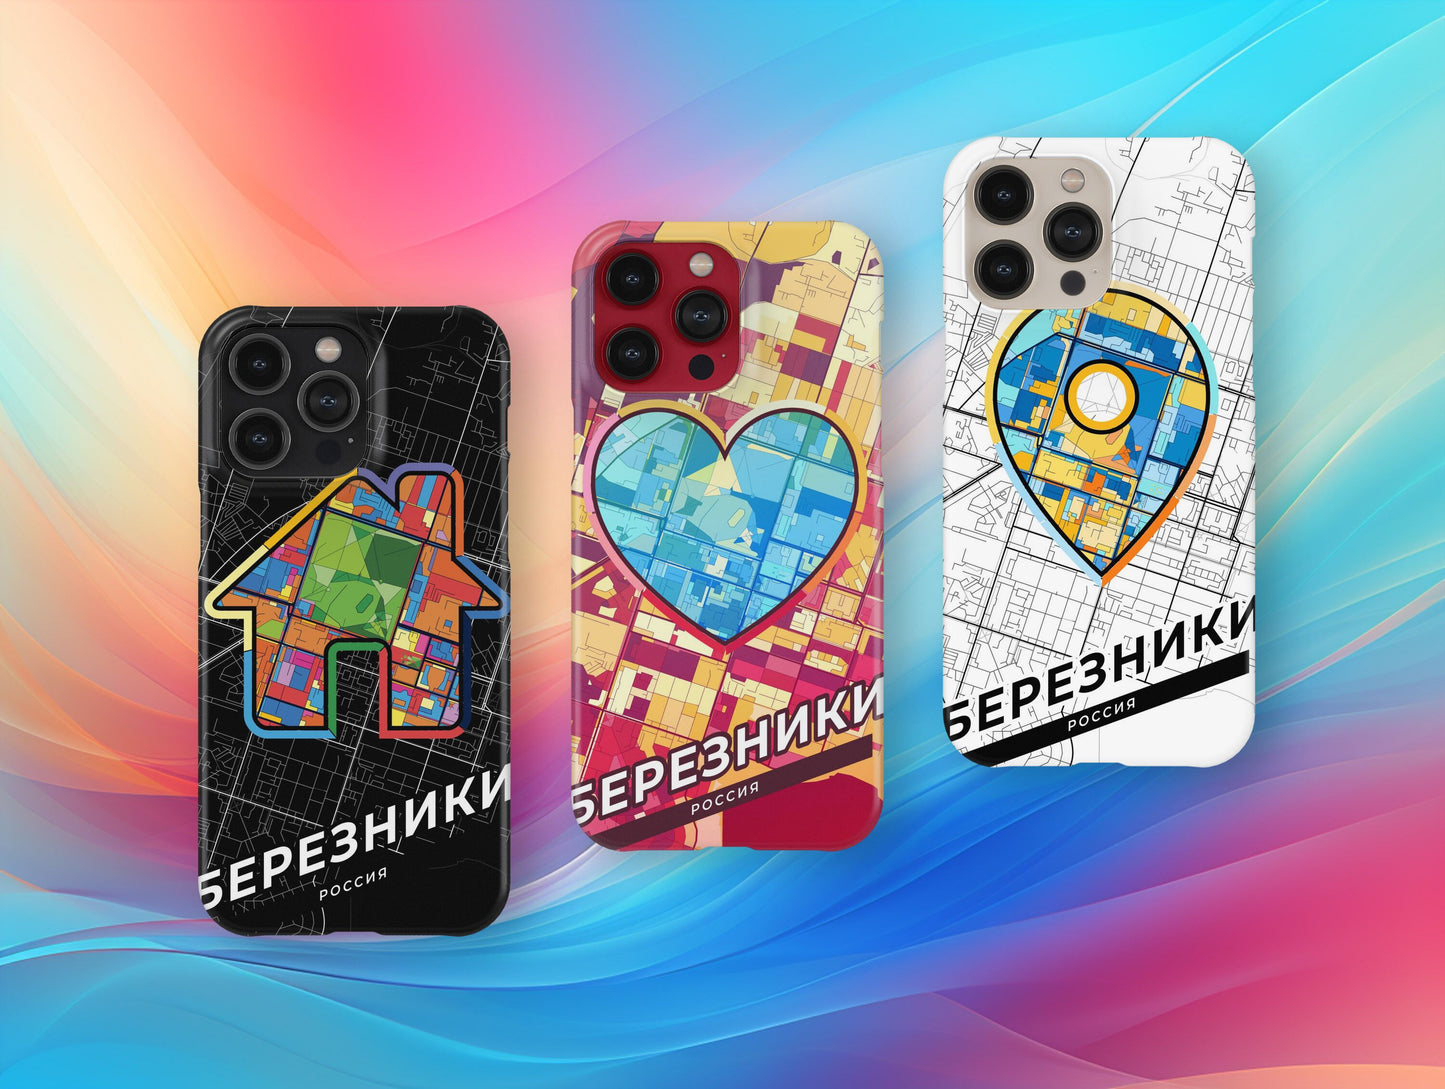 Berezniki Russia slim phone case with colorful icon. Birthday, wedding or housewarming gift. Couple match cases.